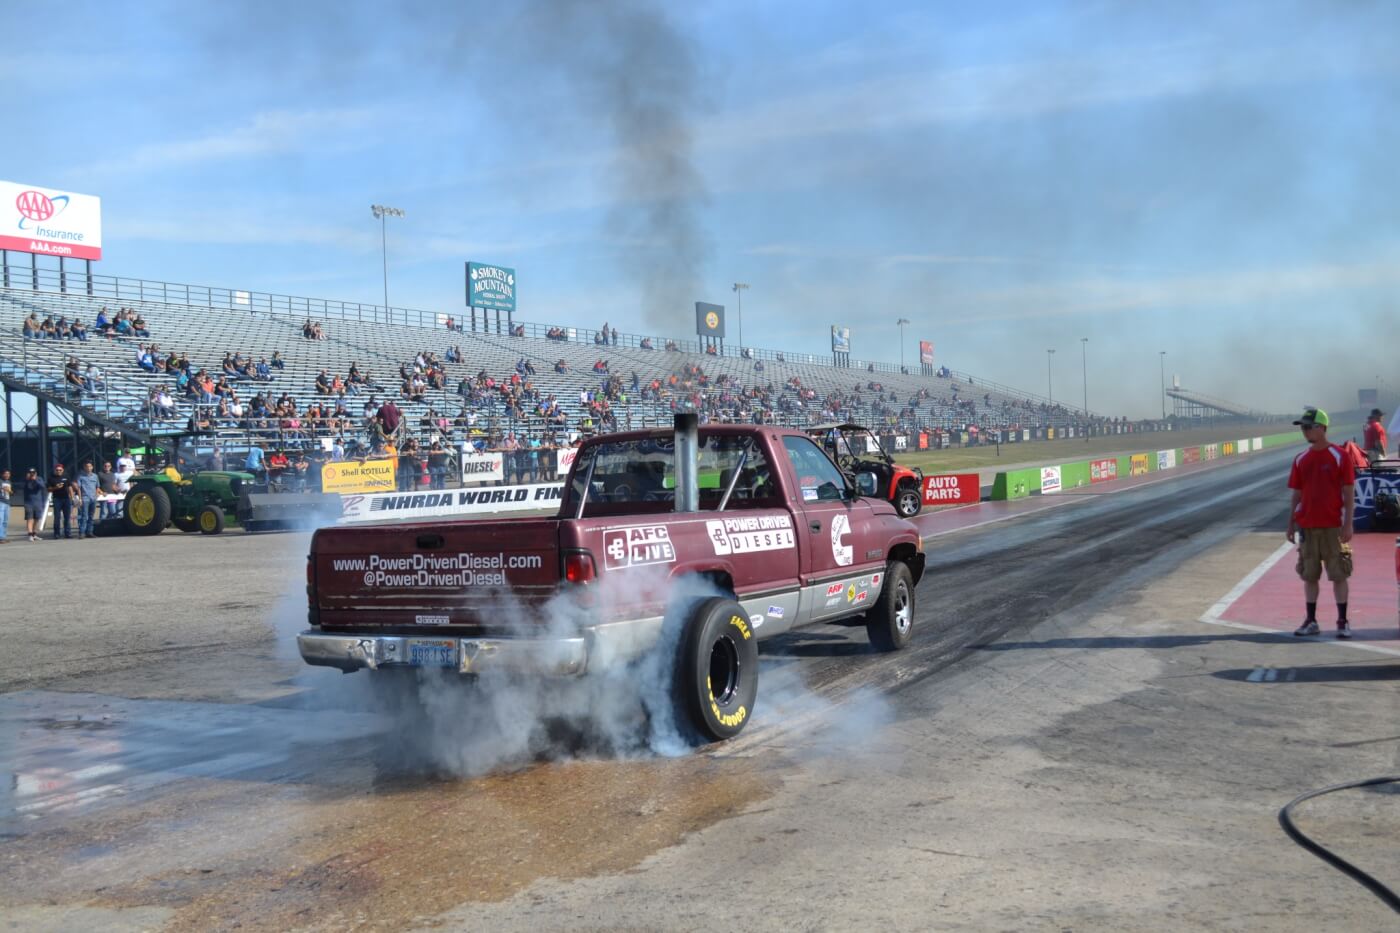 Two wheel drive diesels on slicks could be seen everywhere this year at the World Finals. Trucks like Power Driven Diesel's 10-second "Junker Drag Truck" wowed the crowd with big burnouts and quick elapsed times.